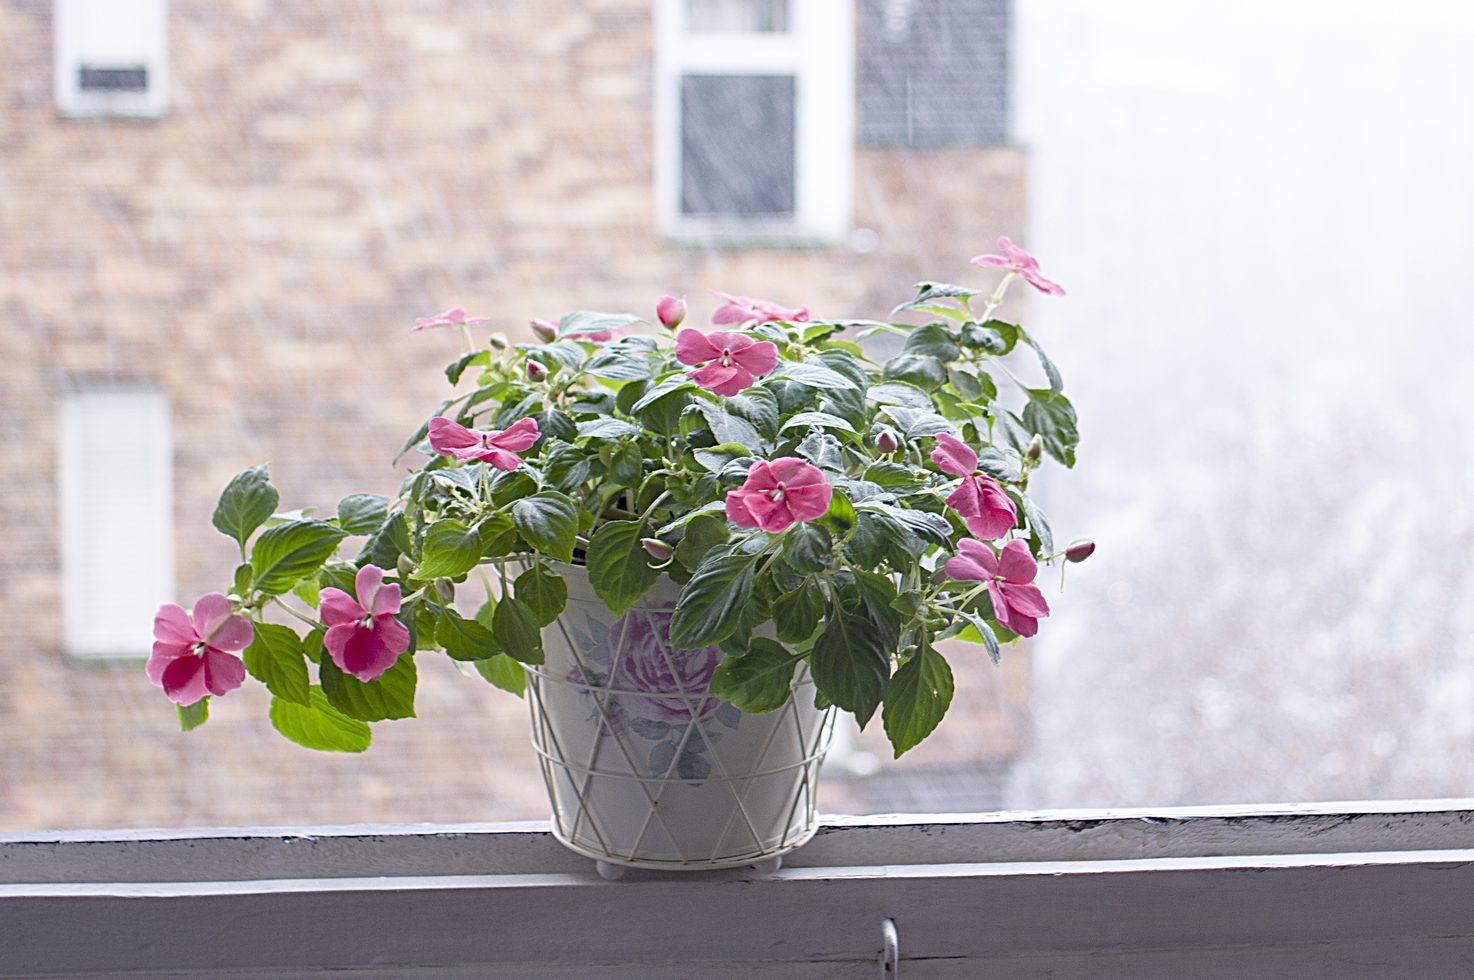 Flowerpot placed in a window frame and snowing outside